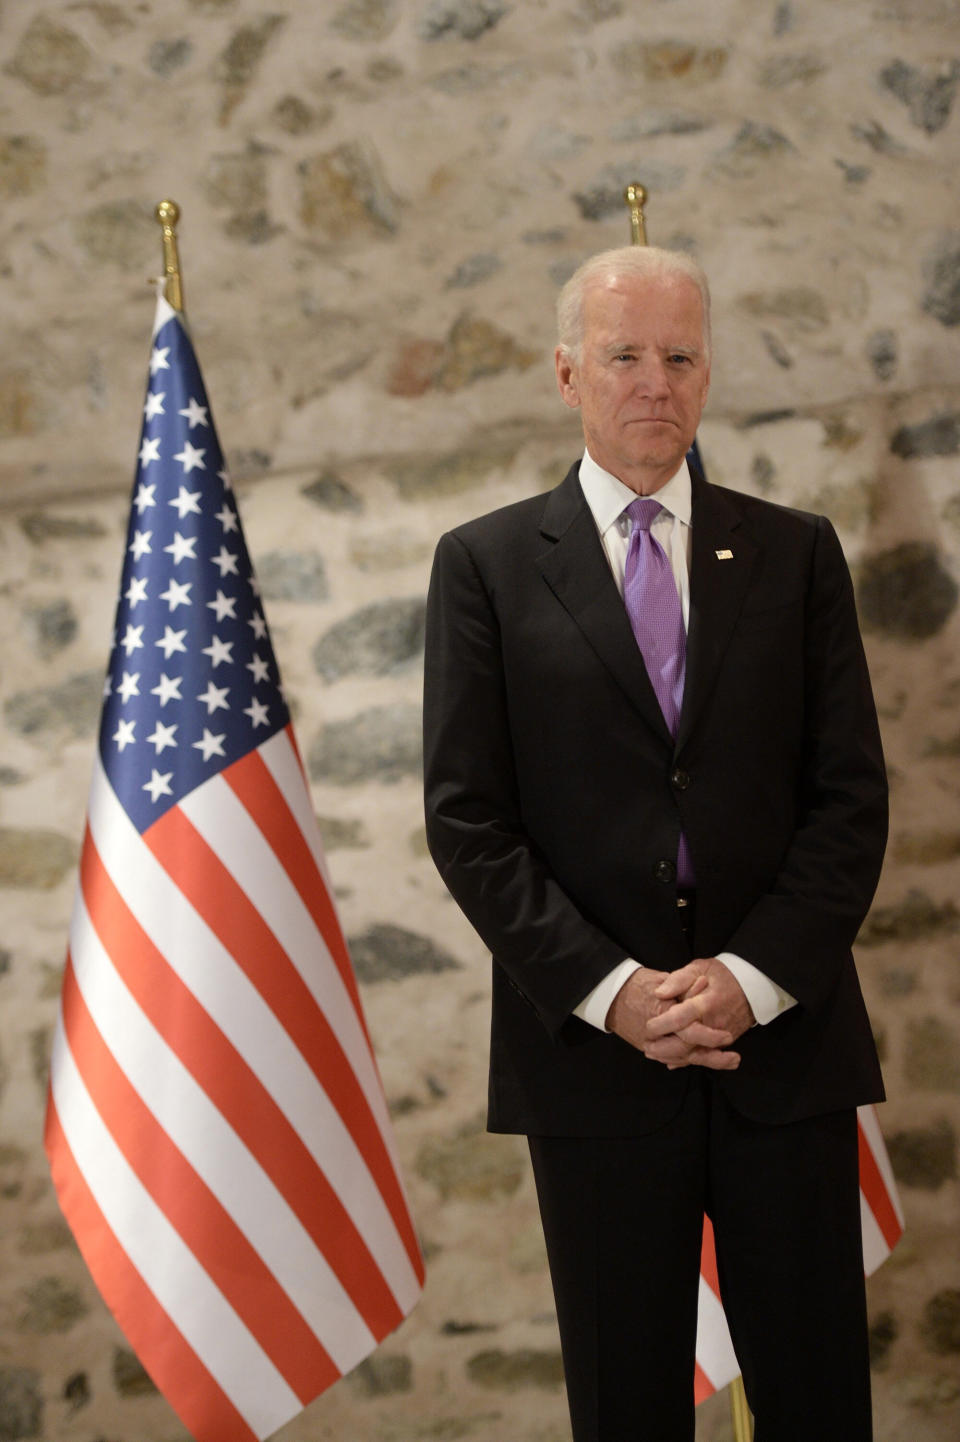 After years of criticism for his plan categorizing Iraq&rsquo;s residents as irredeemably different from each other, and poll after poll showing sectarian politics weren't the highest aspiration of many Iraqis, Biden remained unmoved. (Photo: Anadolu Agency via Getty Images)